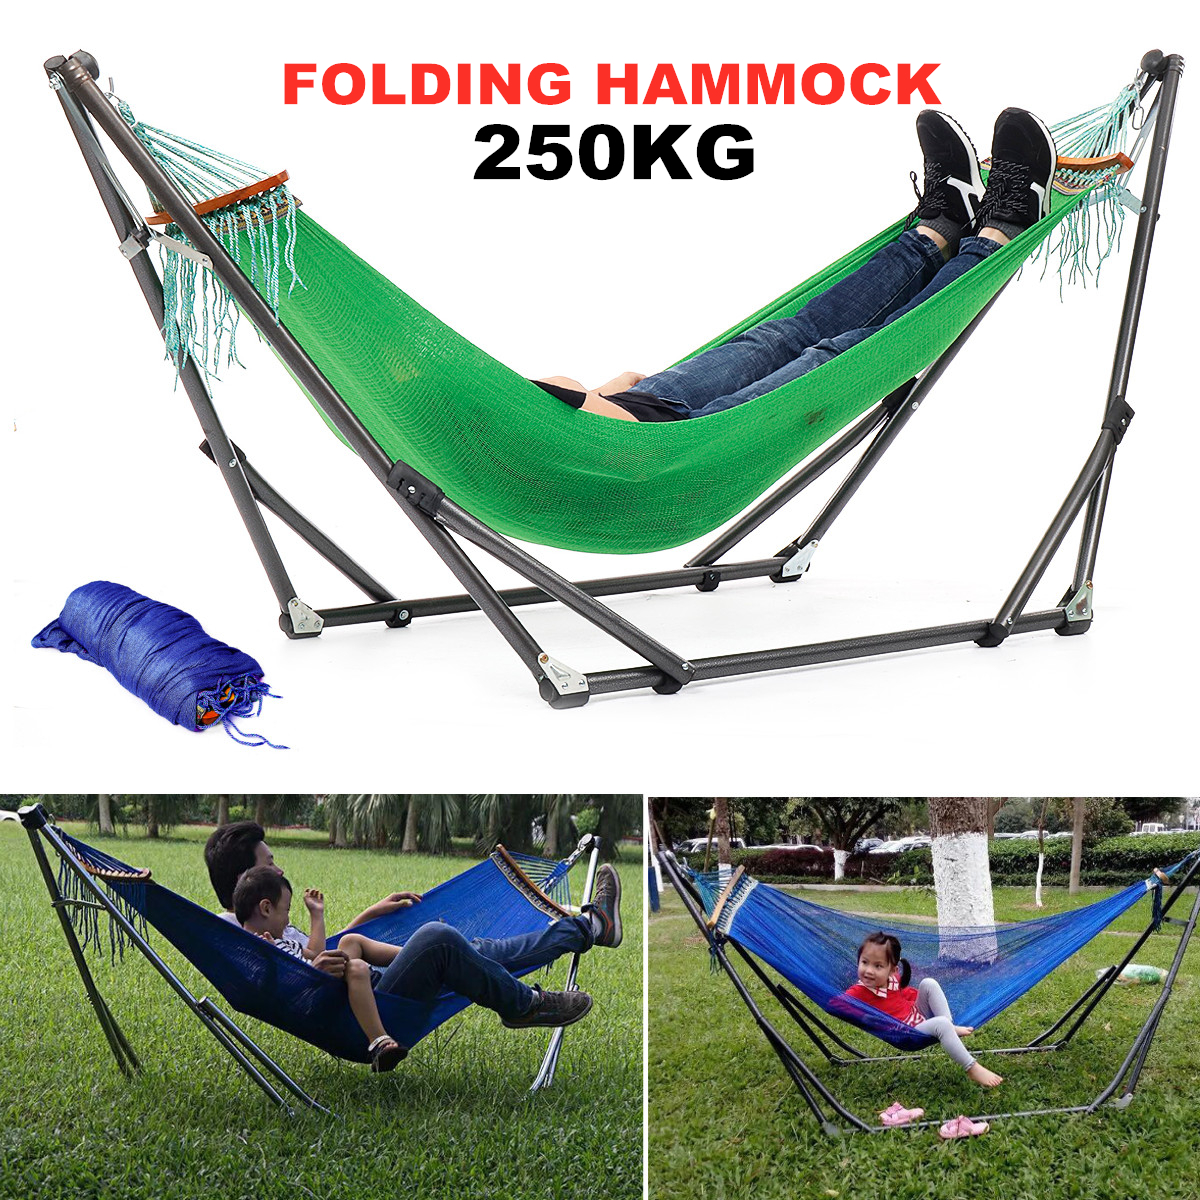 Portable Canvas Hammock Stand Portable Multifunctional Practical Outdoor Garden Swing Hammock Single Hanging Chair Bed Leisure Camping Travel 2